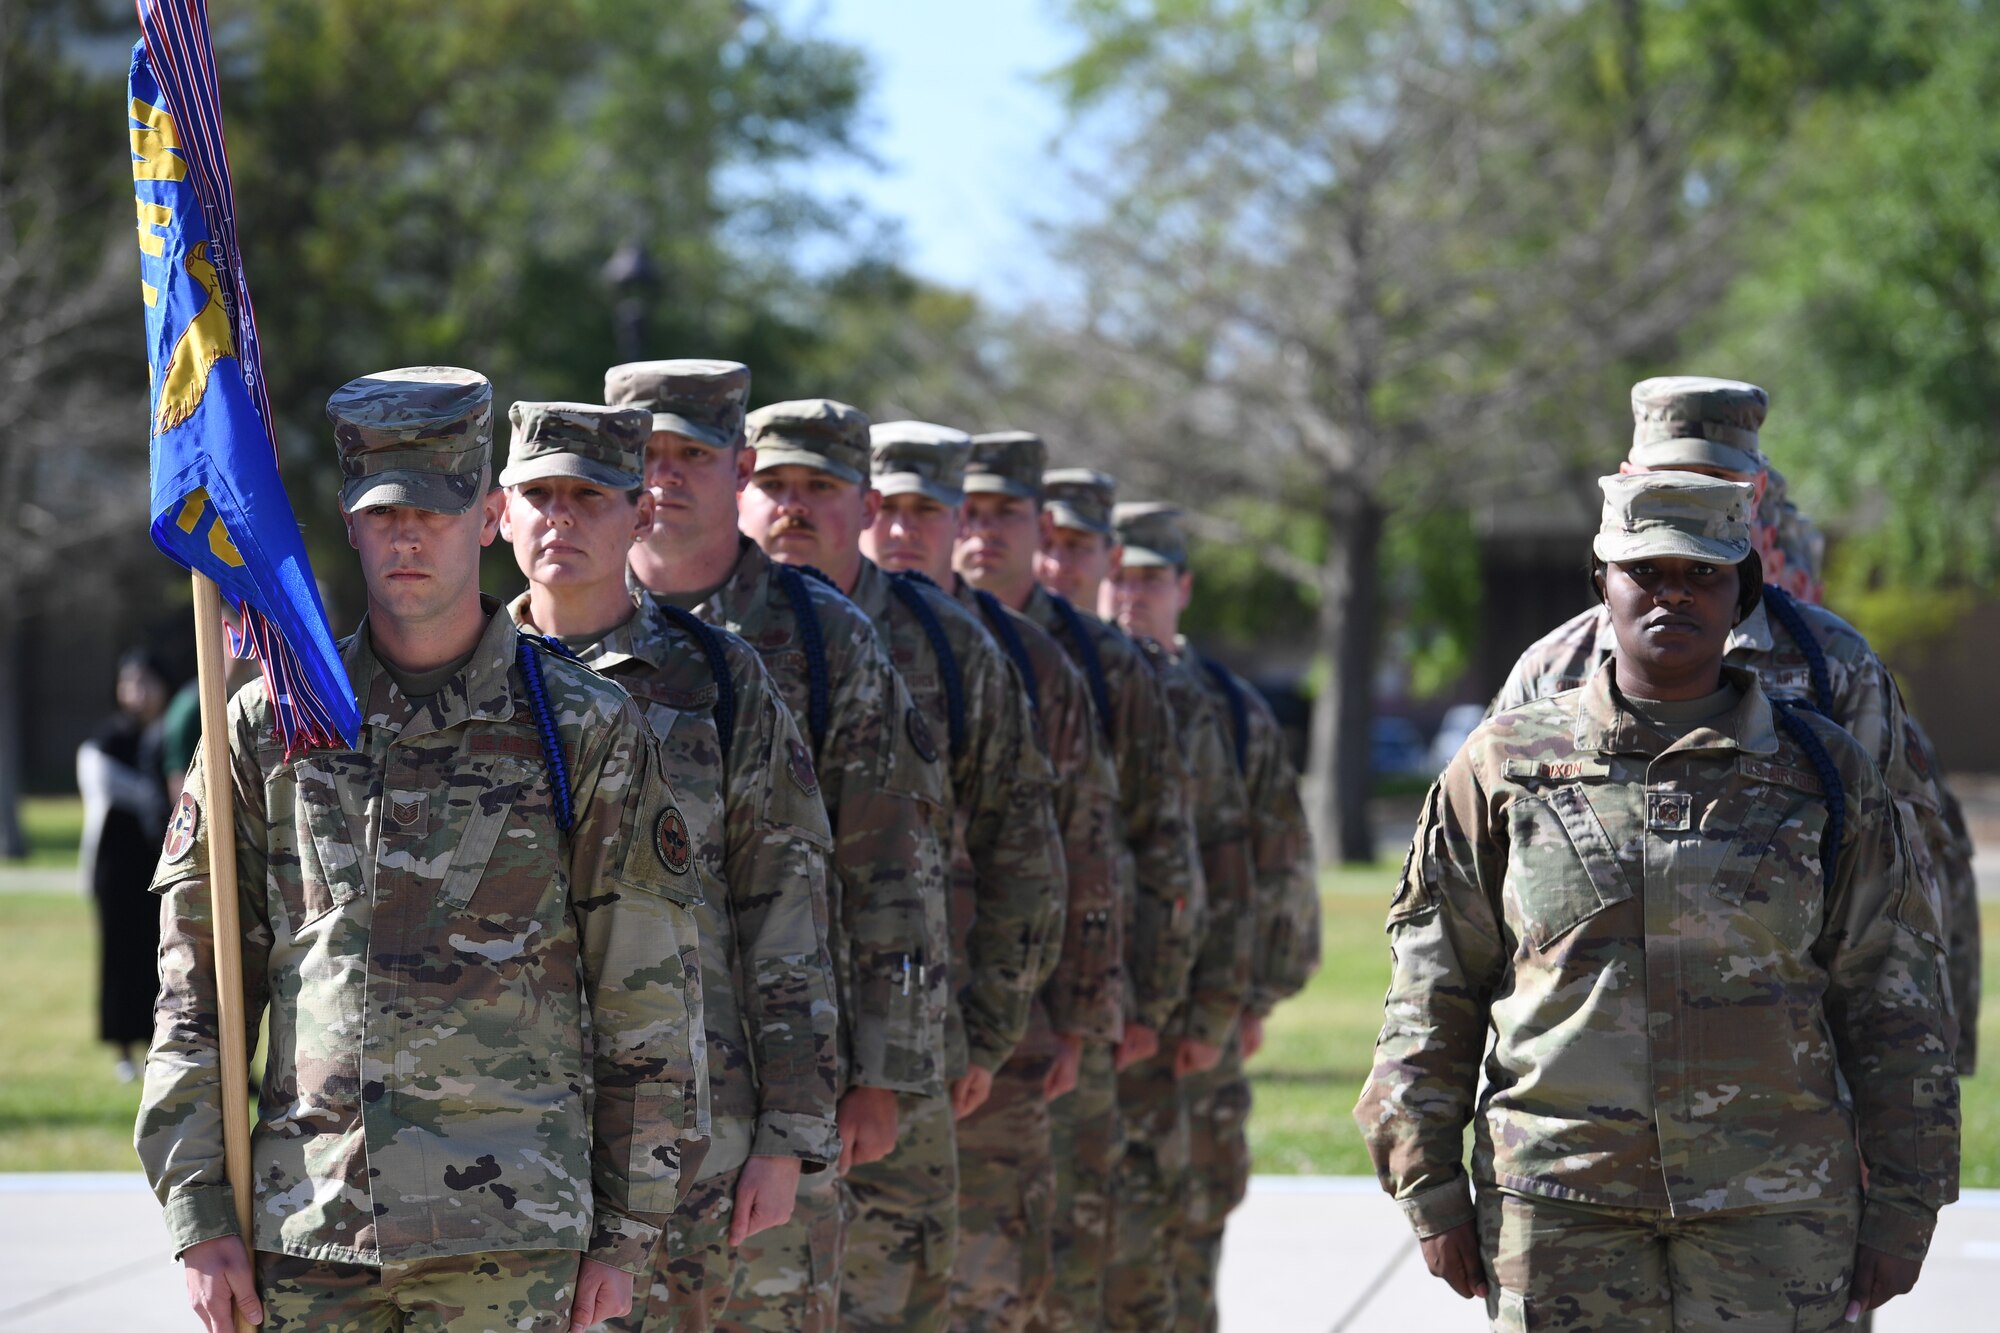 Military Training Leaders from the 81st Training Group stand in formation at the Levitow Training Support Facility on Keesler Air Force Base, Mississippi, April 1, 2022 . (U.S. Air Force photo by Kemberly Groue)